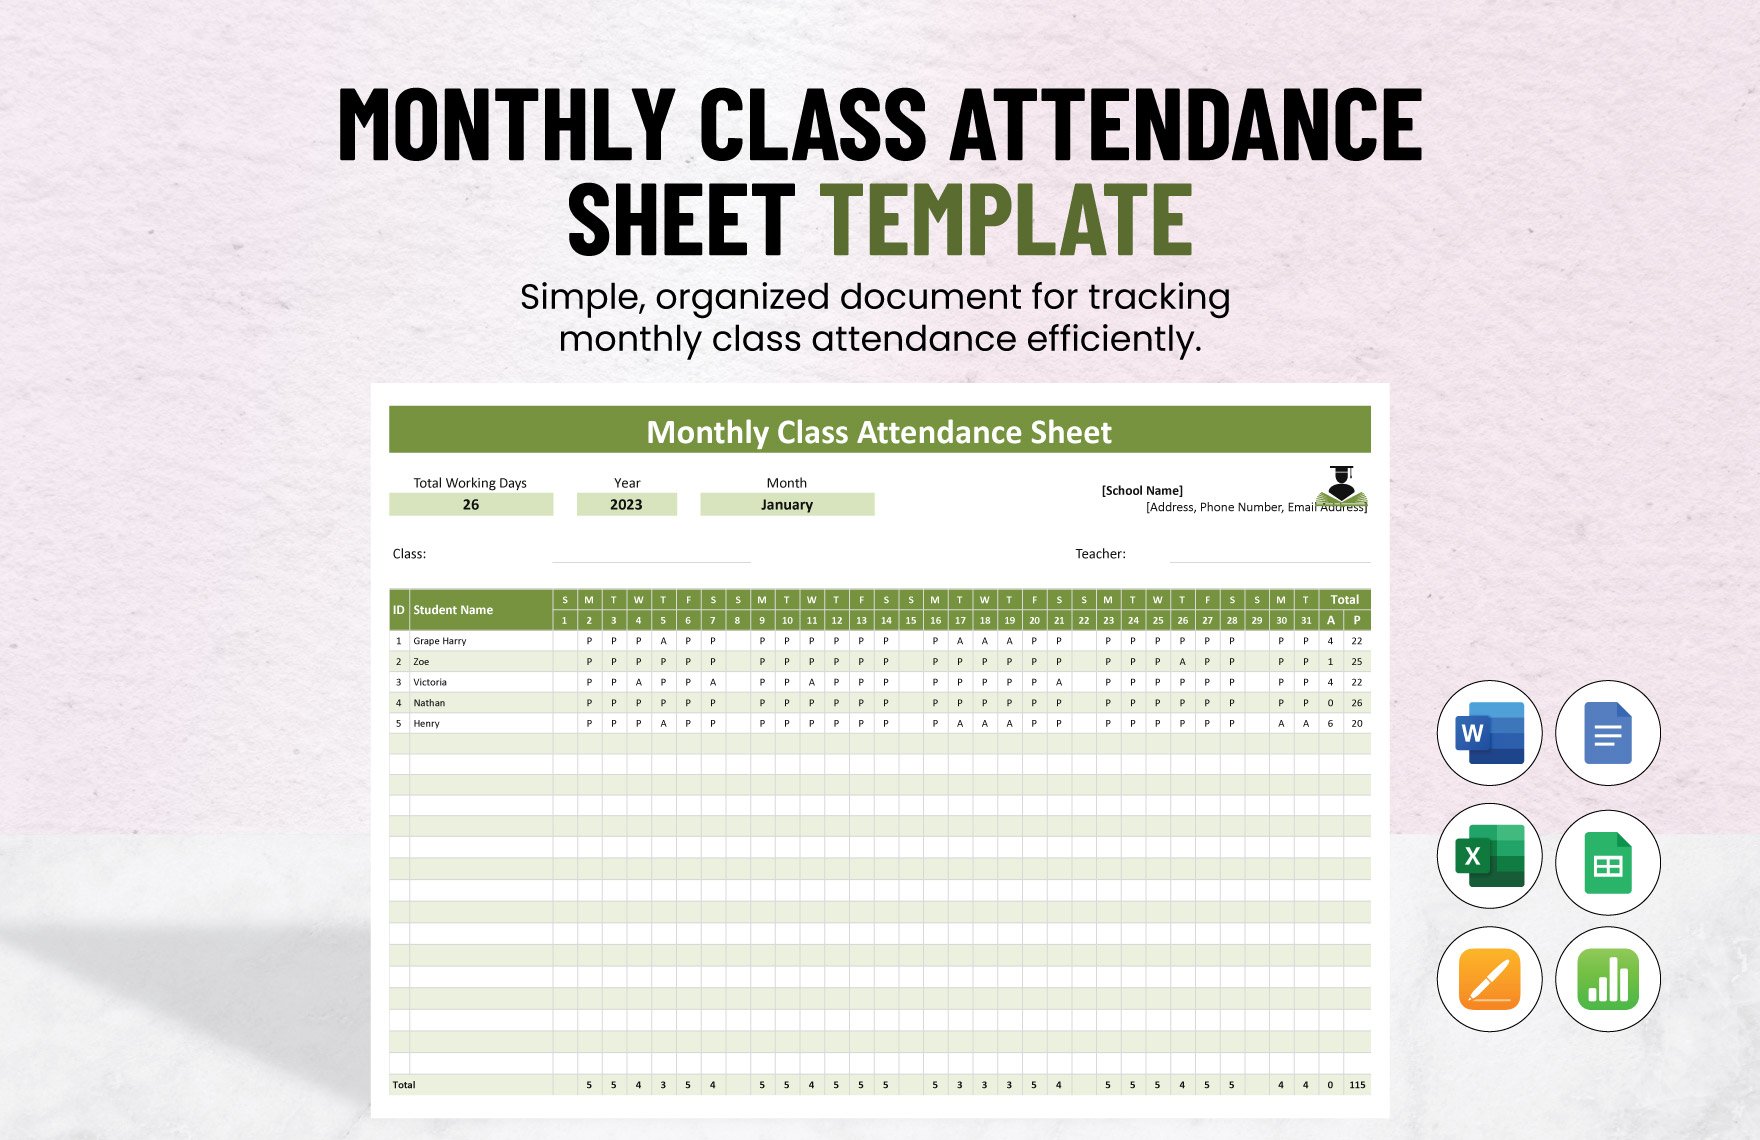 Monthly Class Attendance Sheet Template in Word, Google Docs, Excel, Google Sheets, Apple Pages, Apple Numbers